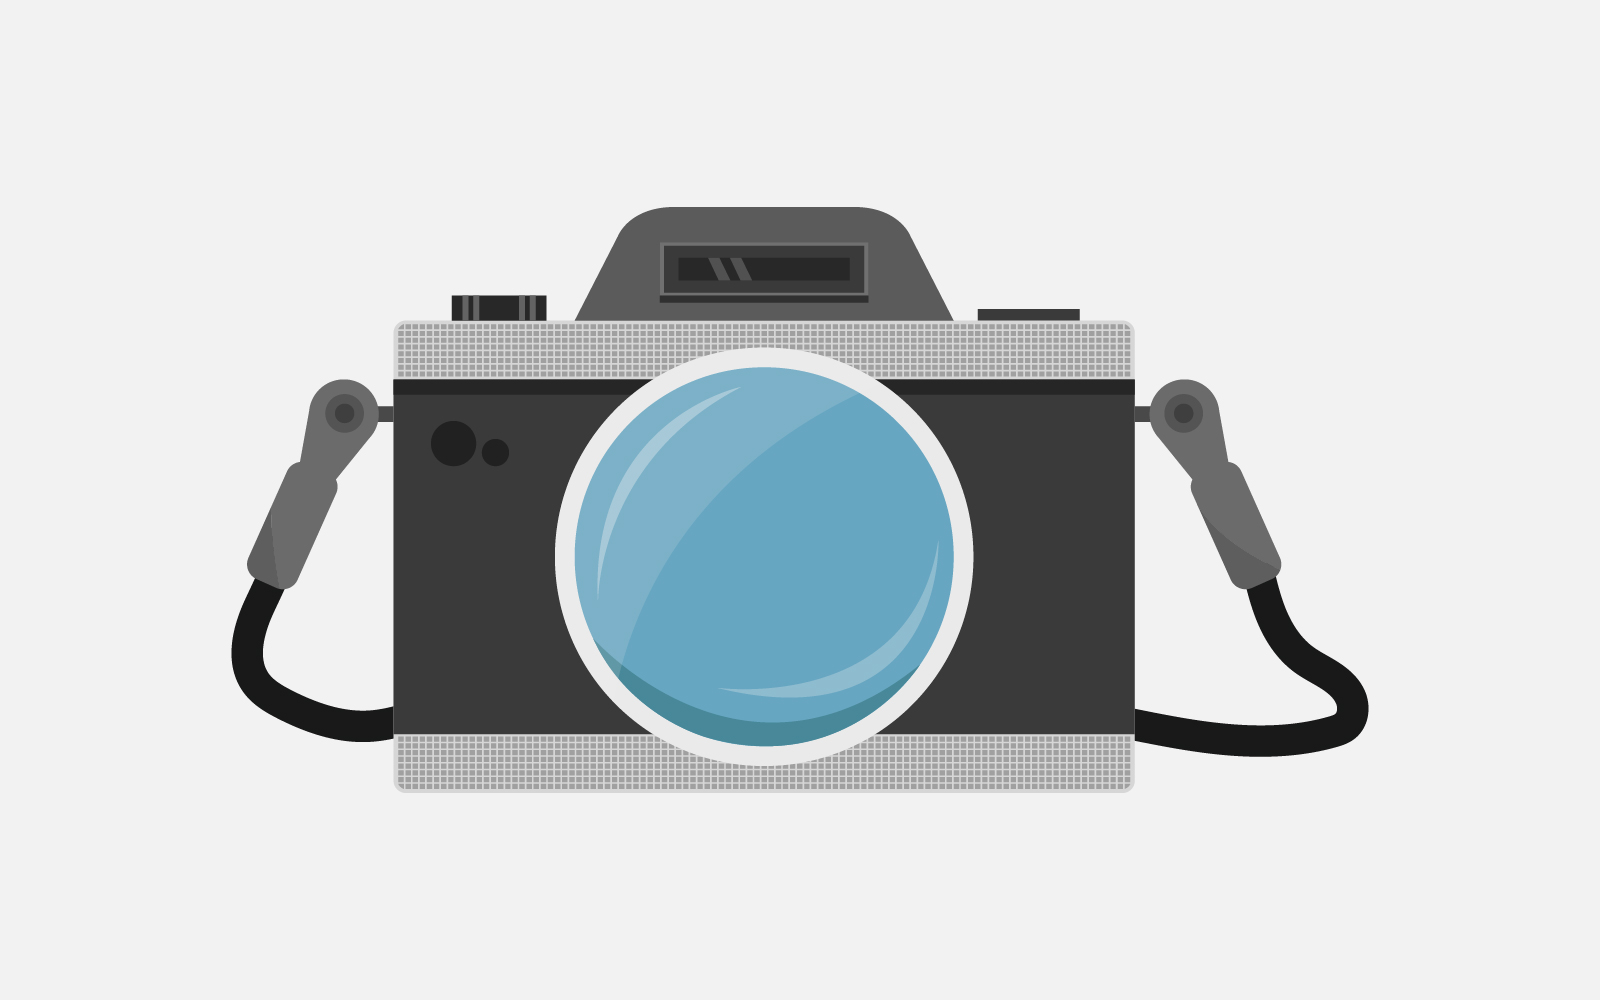 Photo camera illustrated in vector on a white background